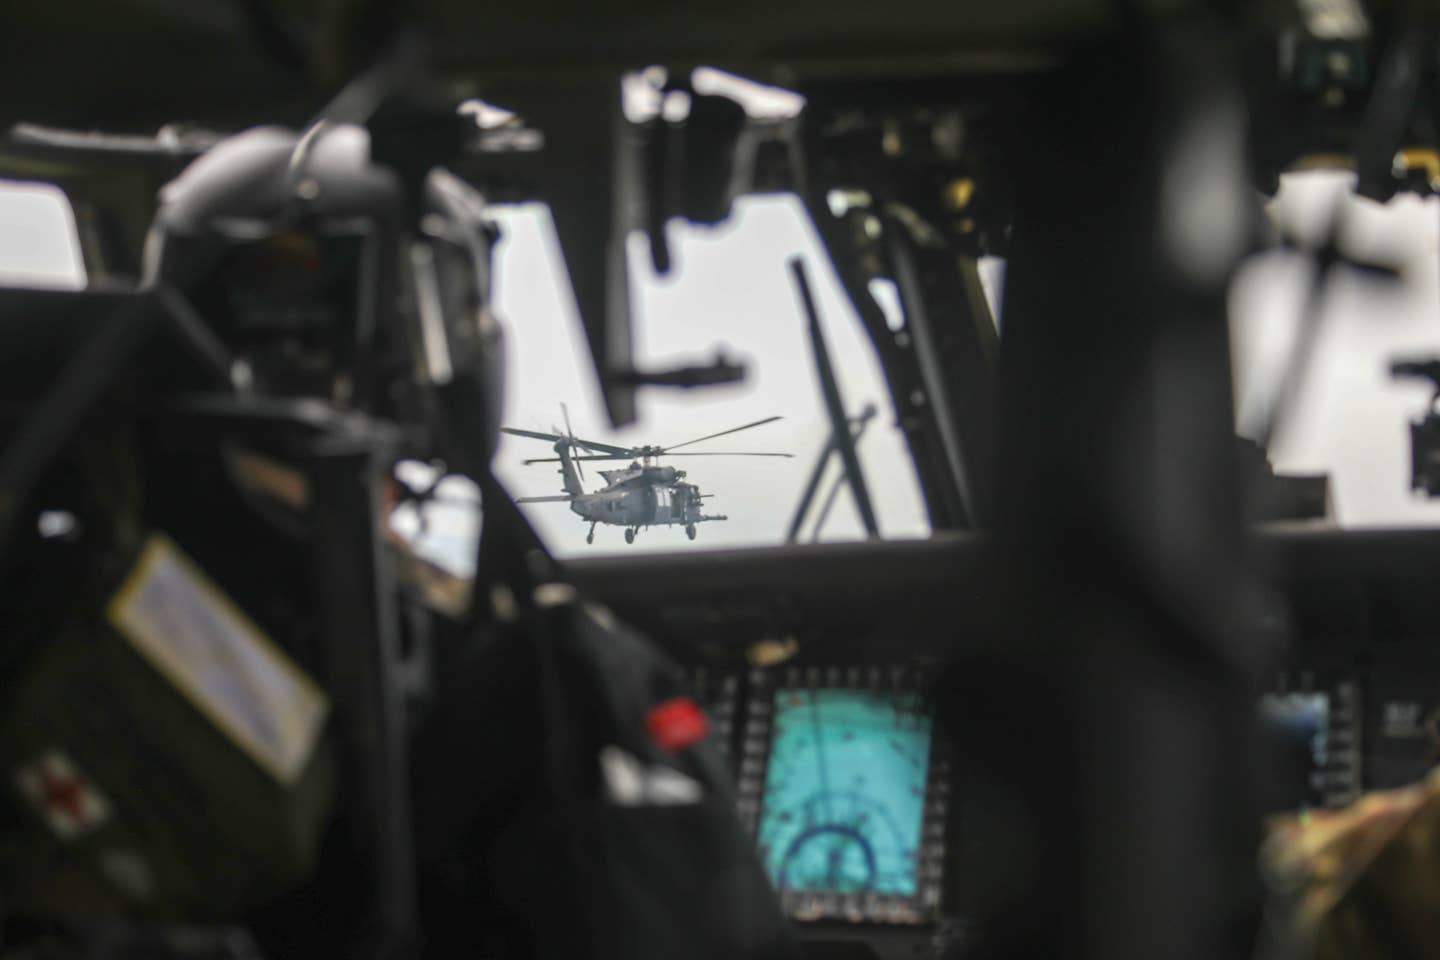 An MH-60M helicopter belonging to the US Army's 160th Special Operations Aviation Regiment is seen from the cockpit of another one of the unit's Black Hawks during the Polar Dagger exercise. <em>US Army</em>